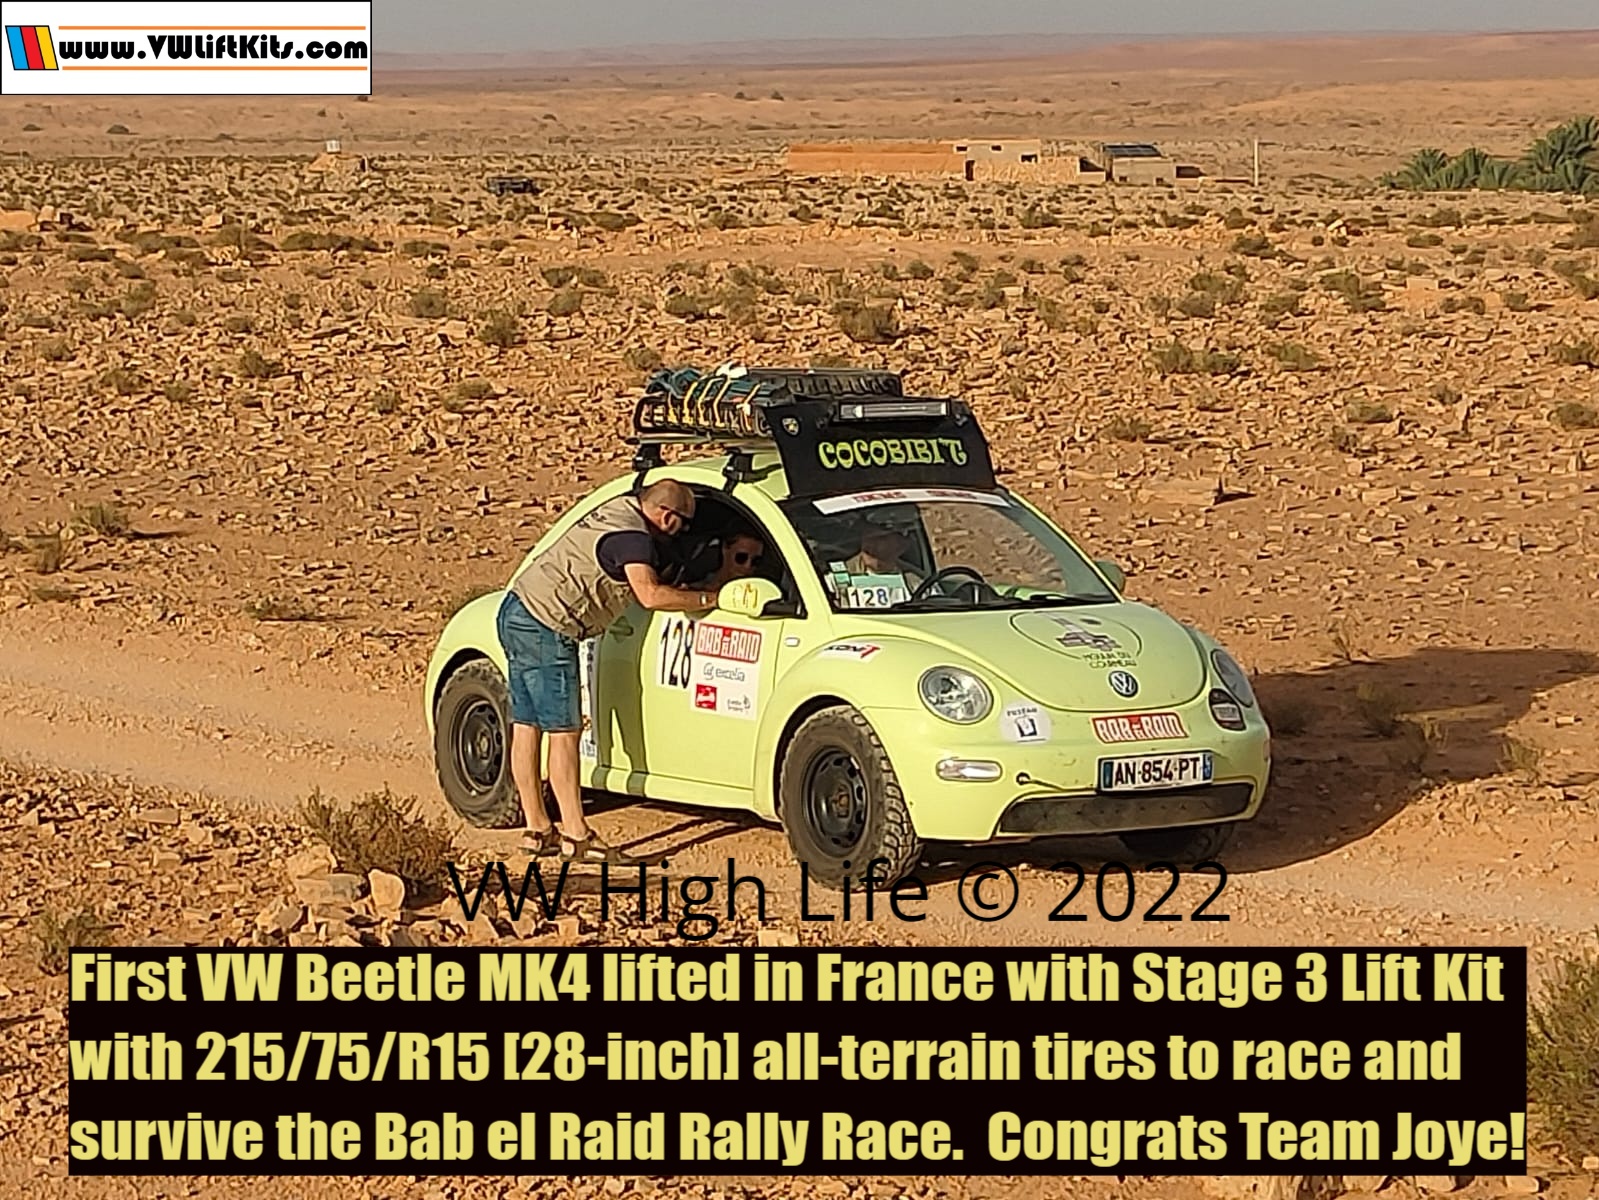 Yann lifted his Beetle MK4 with a Stage 3 Lift Kit to race the Bab el Raid in France! 